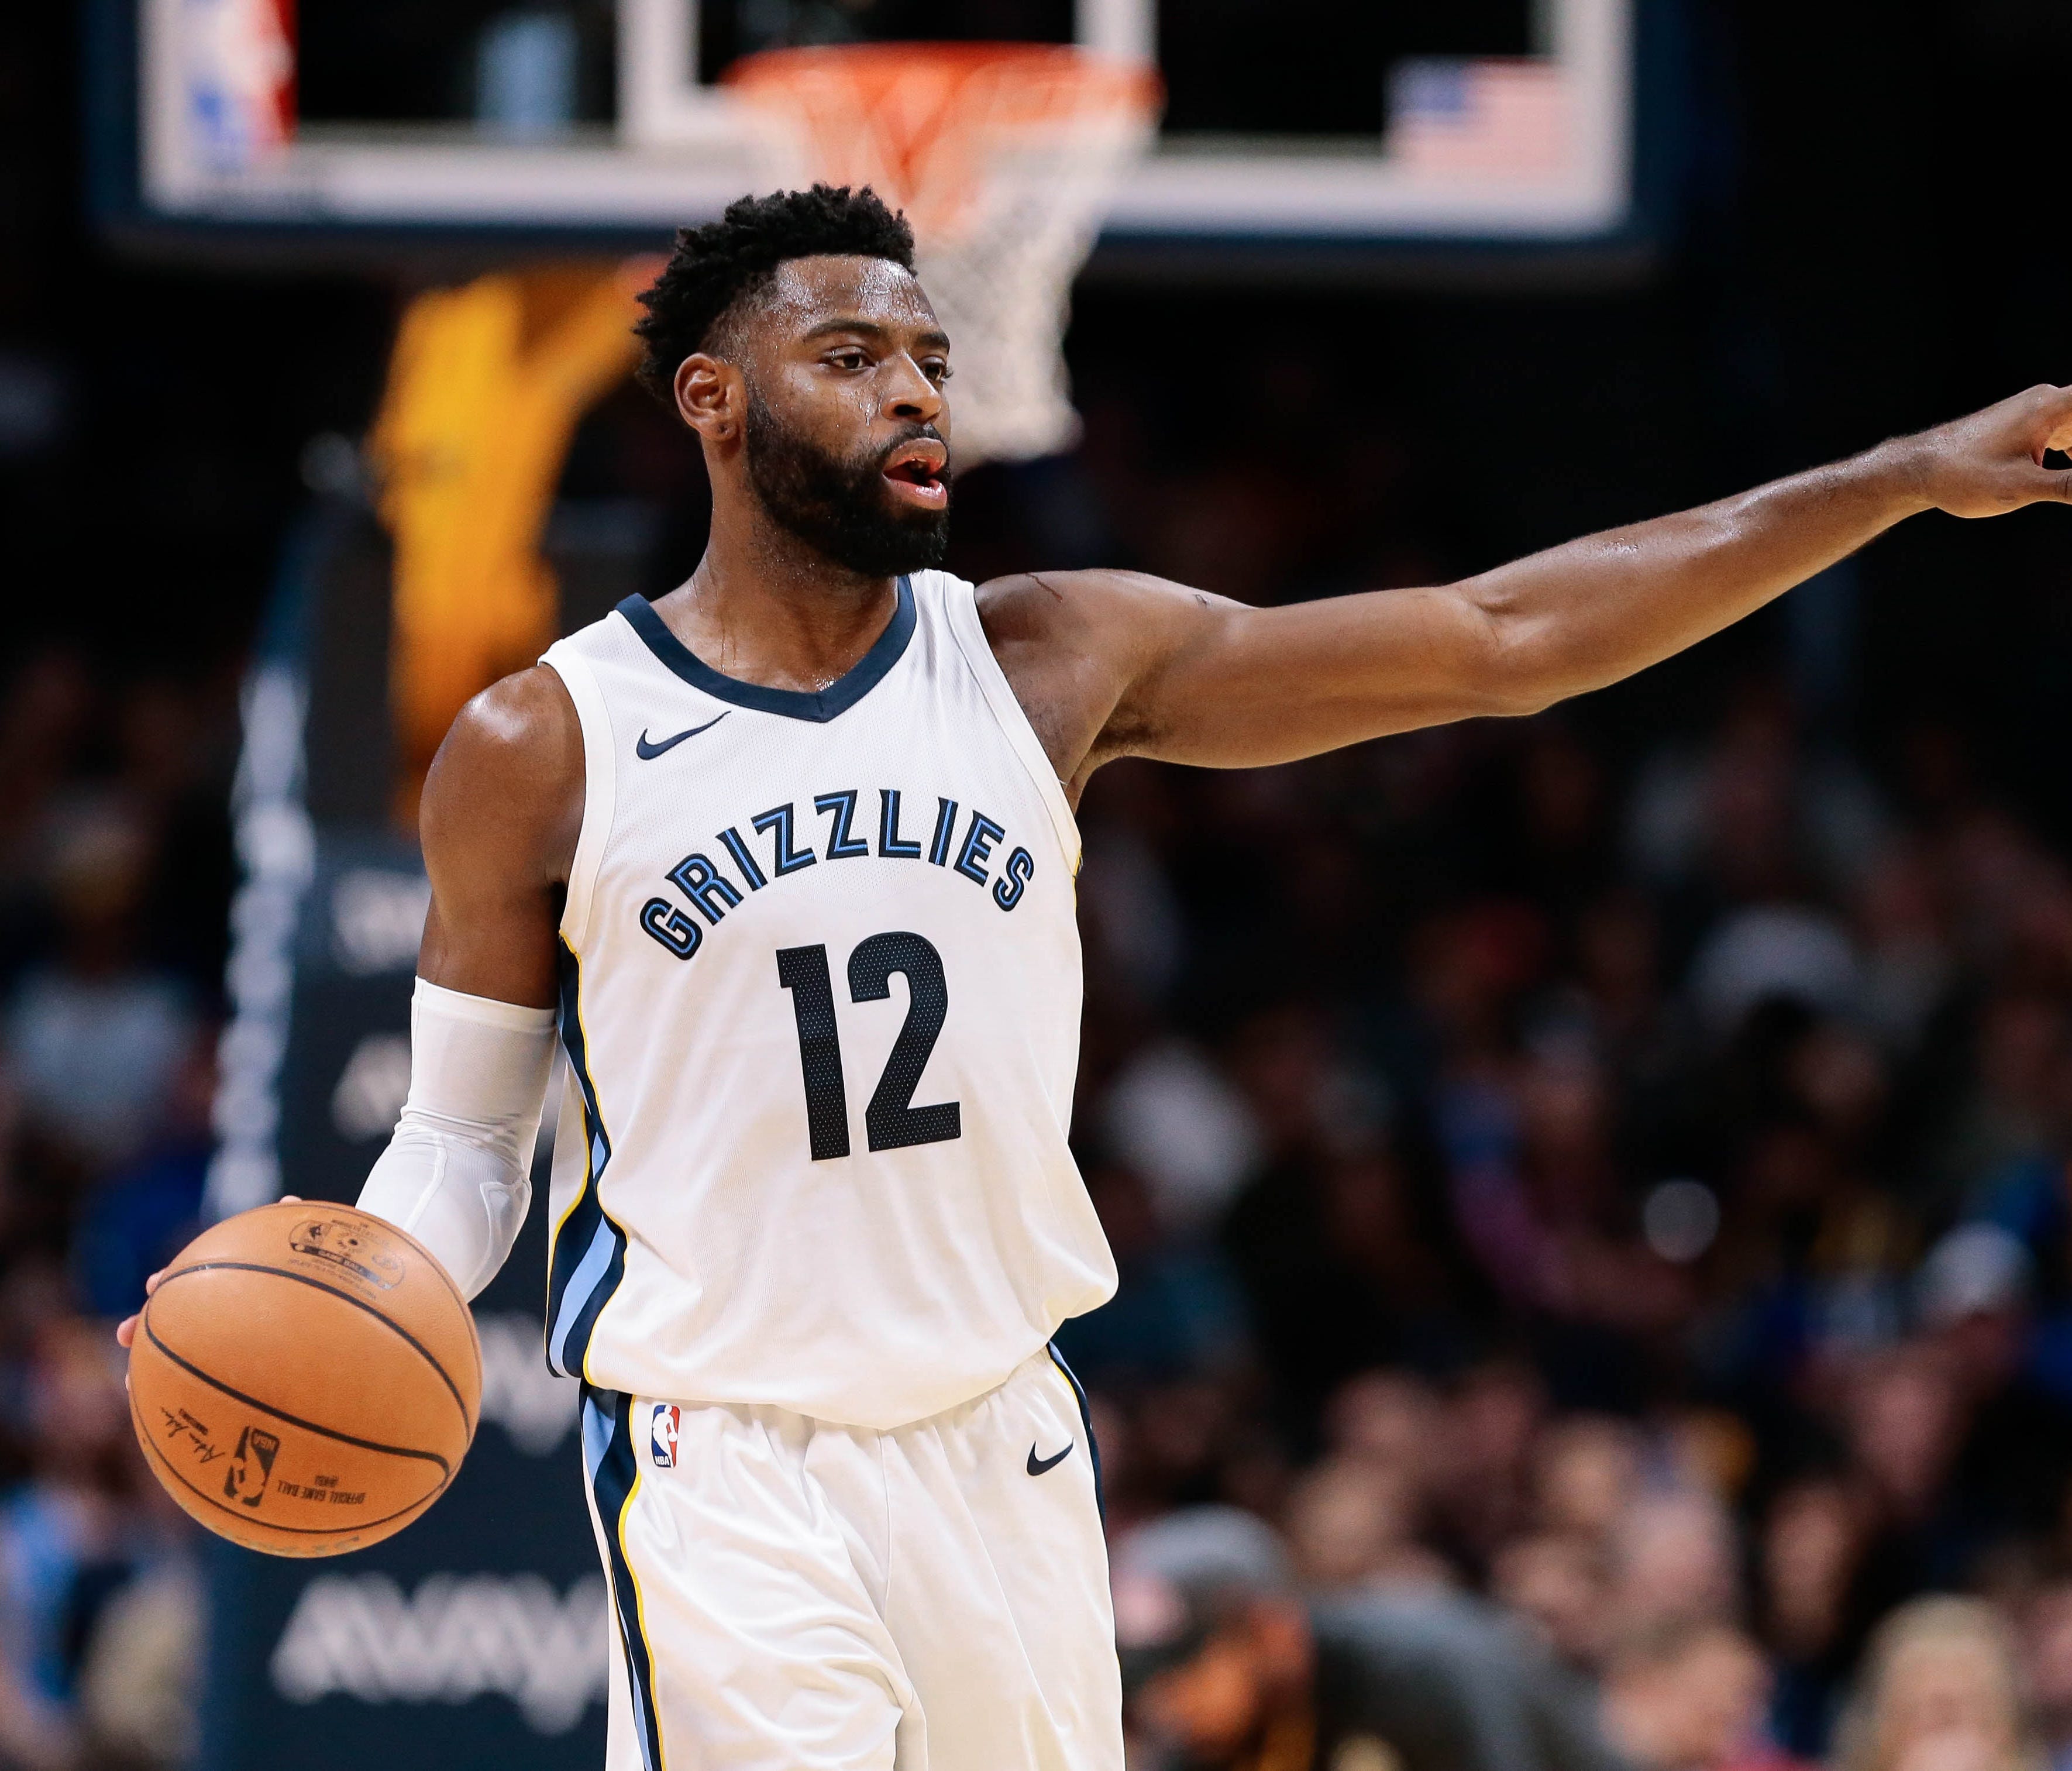 Memphis Grizzlies guard Tyreke Evans (12) motions in the fourth quarter against the Denver Nuggets at the Pepsi Center.